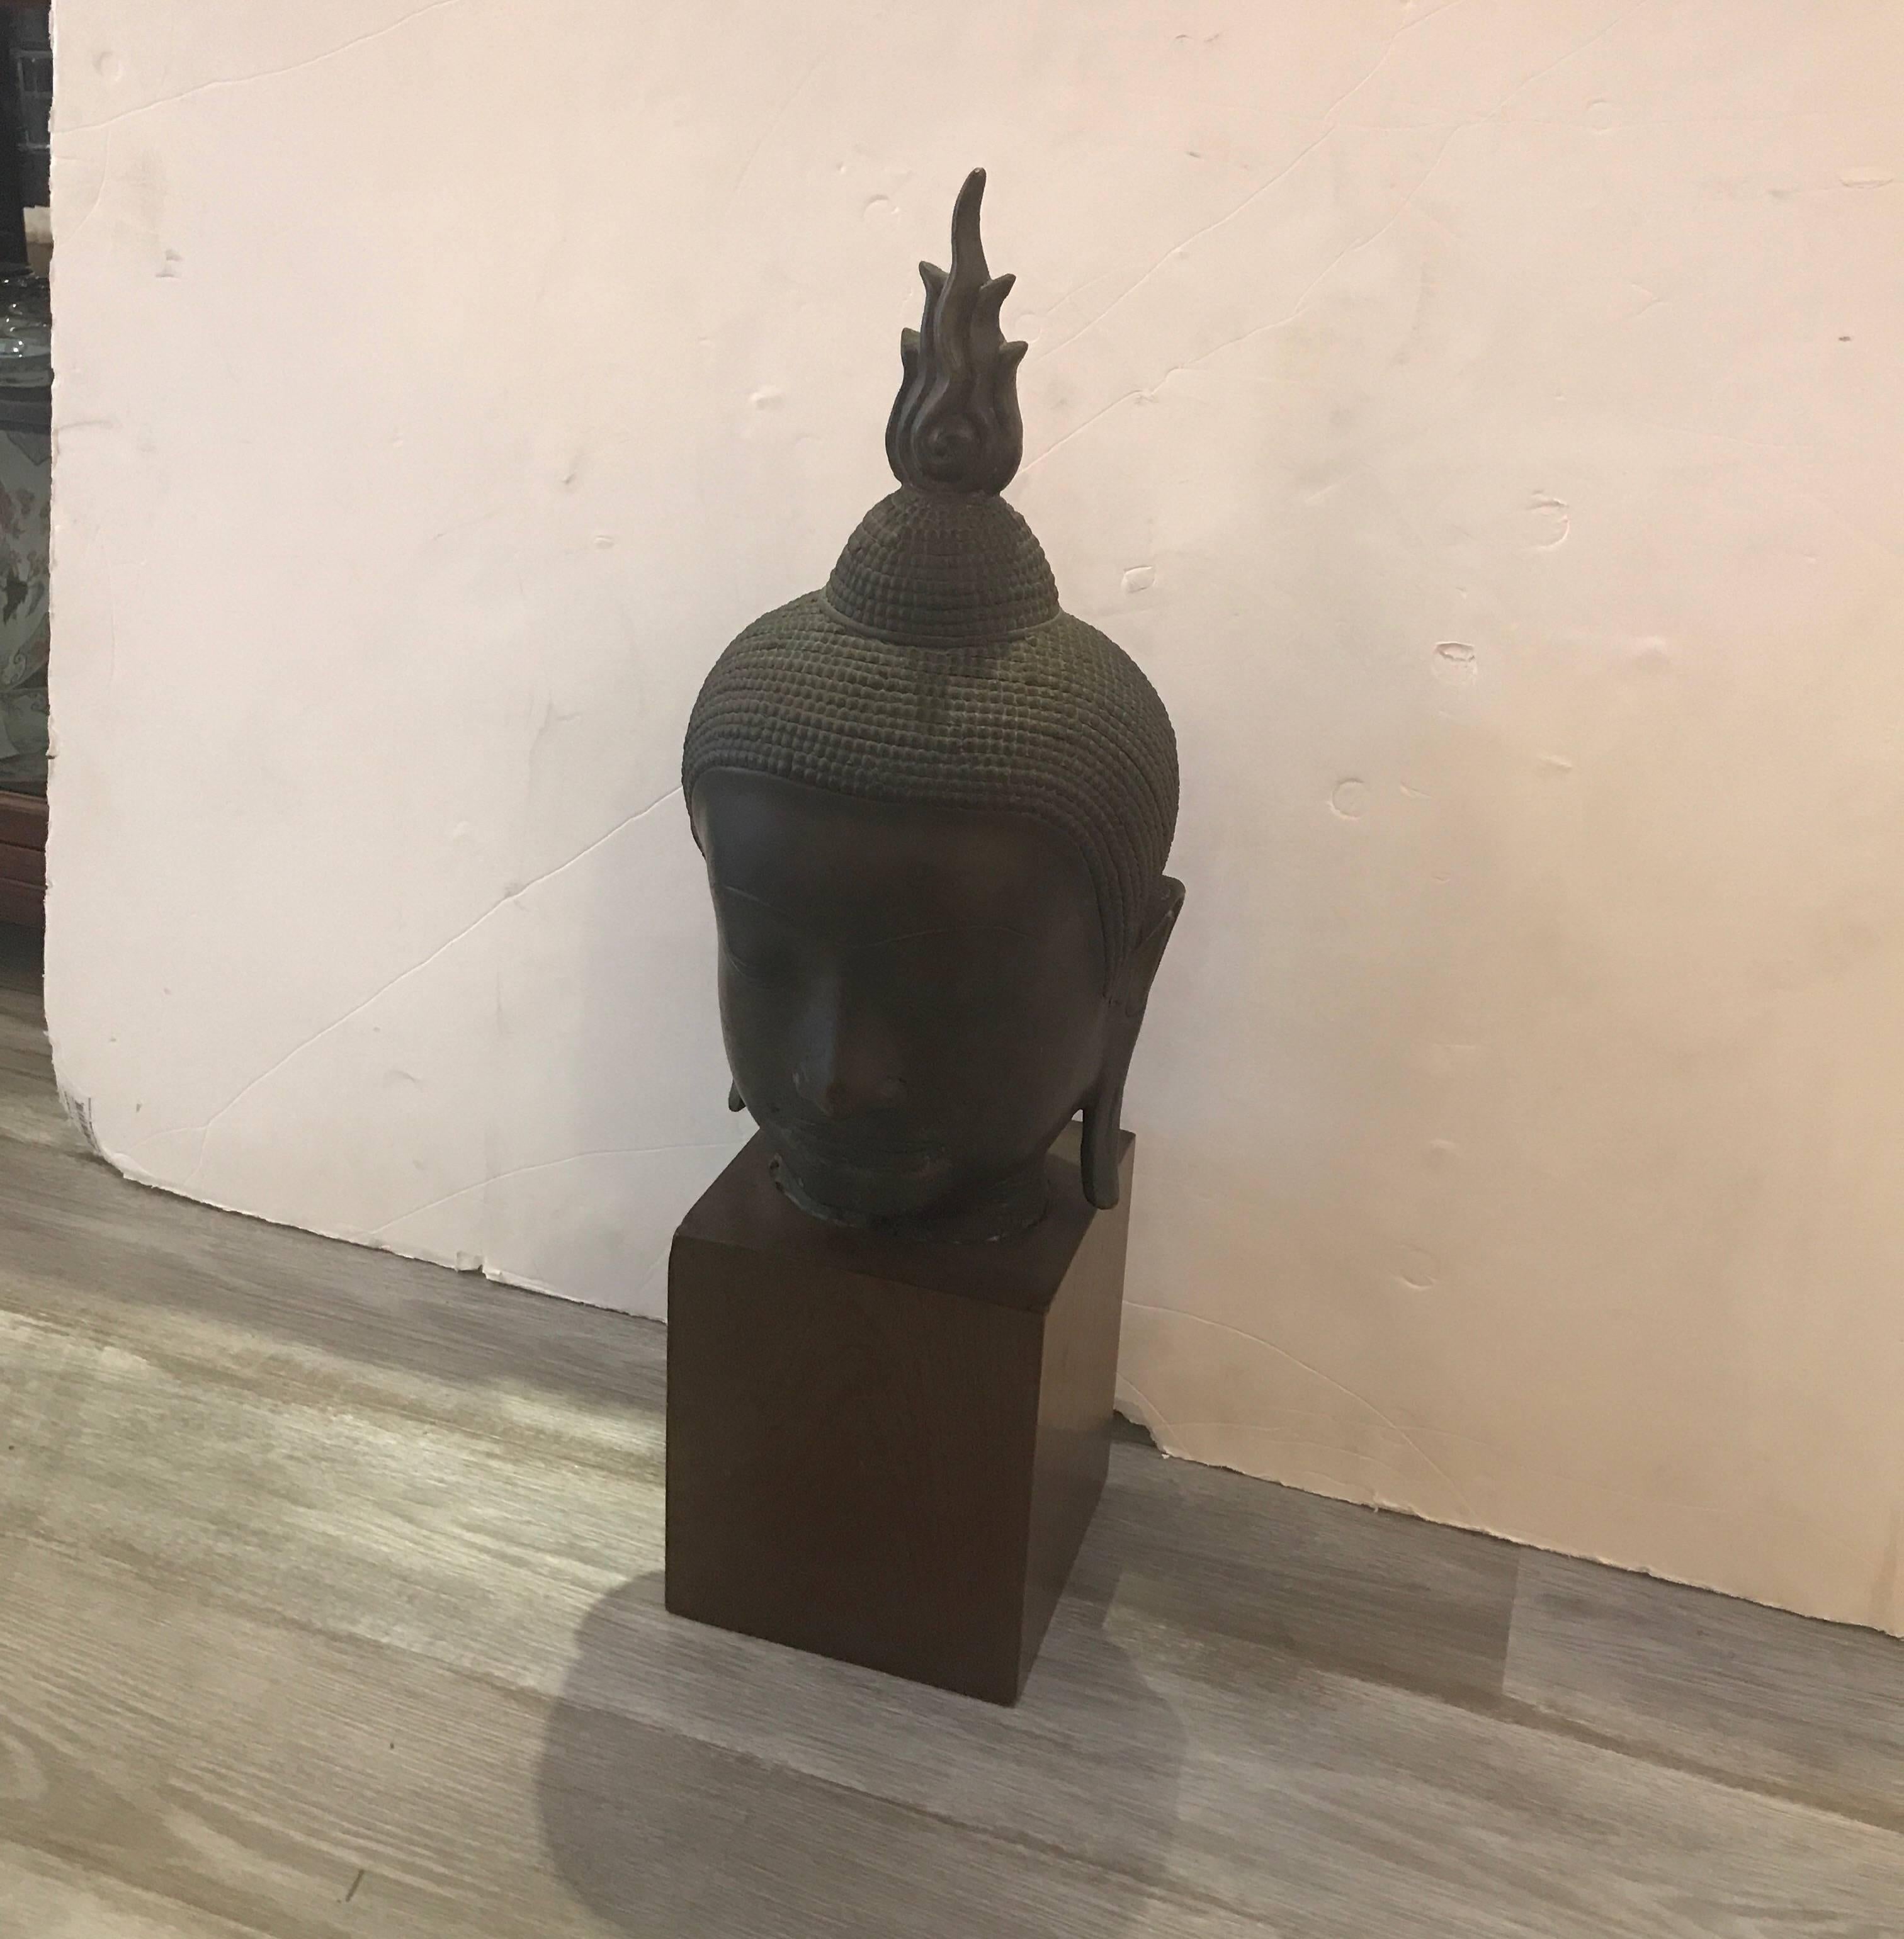 A cast bronze late 19th century Buddha head on solid walnut base. The antique bronze with original patination and aged finish on a later custom solid wood base. The base is 7 inches square. Overall height is 27.5 inches.